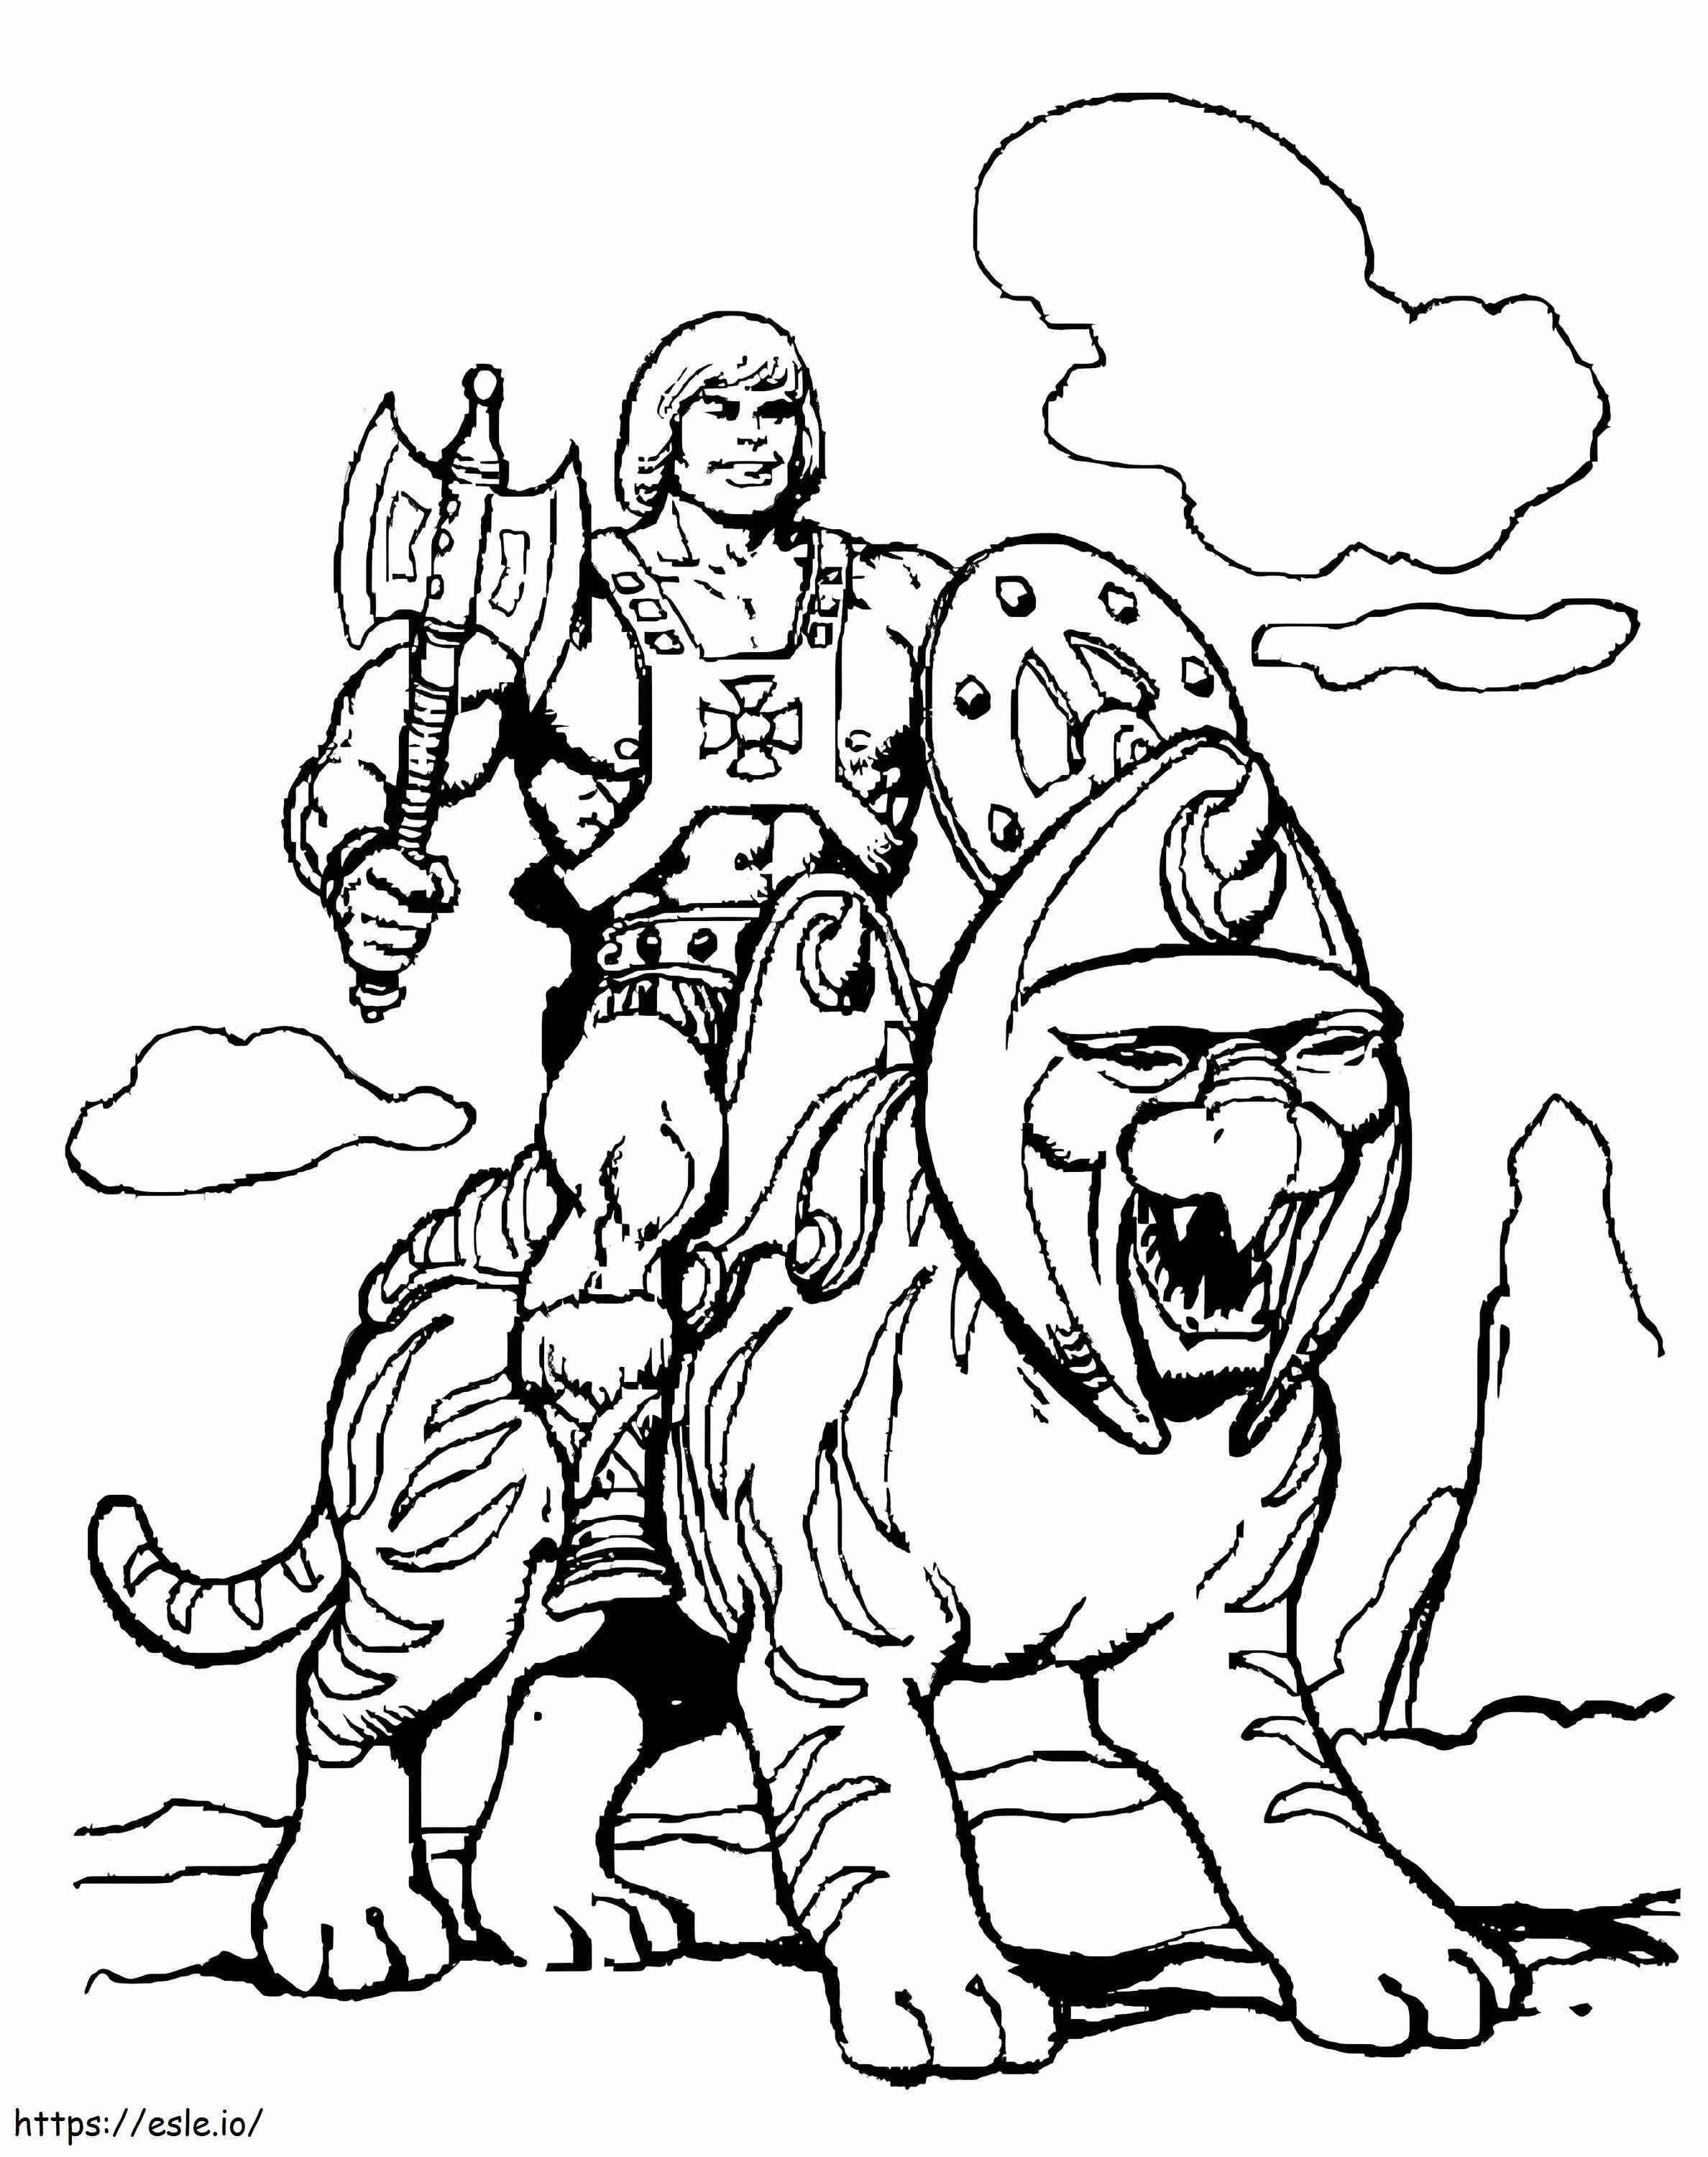 He Man Riding Battle Cat coloring page